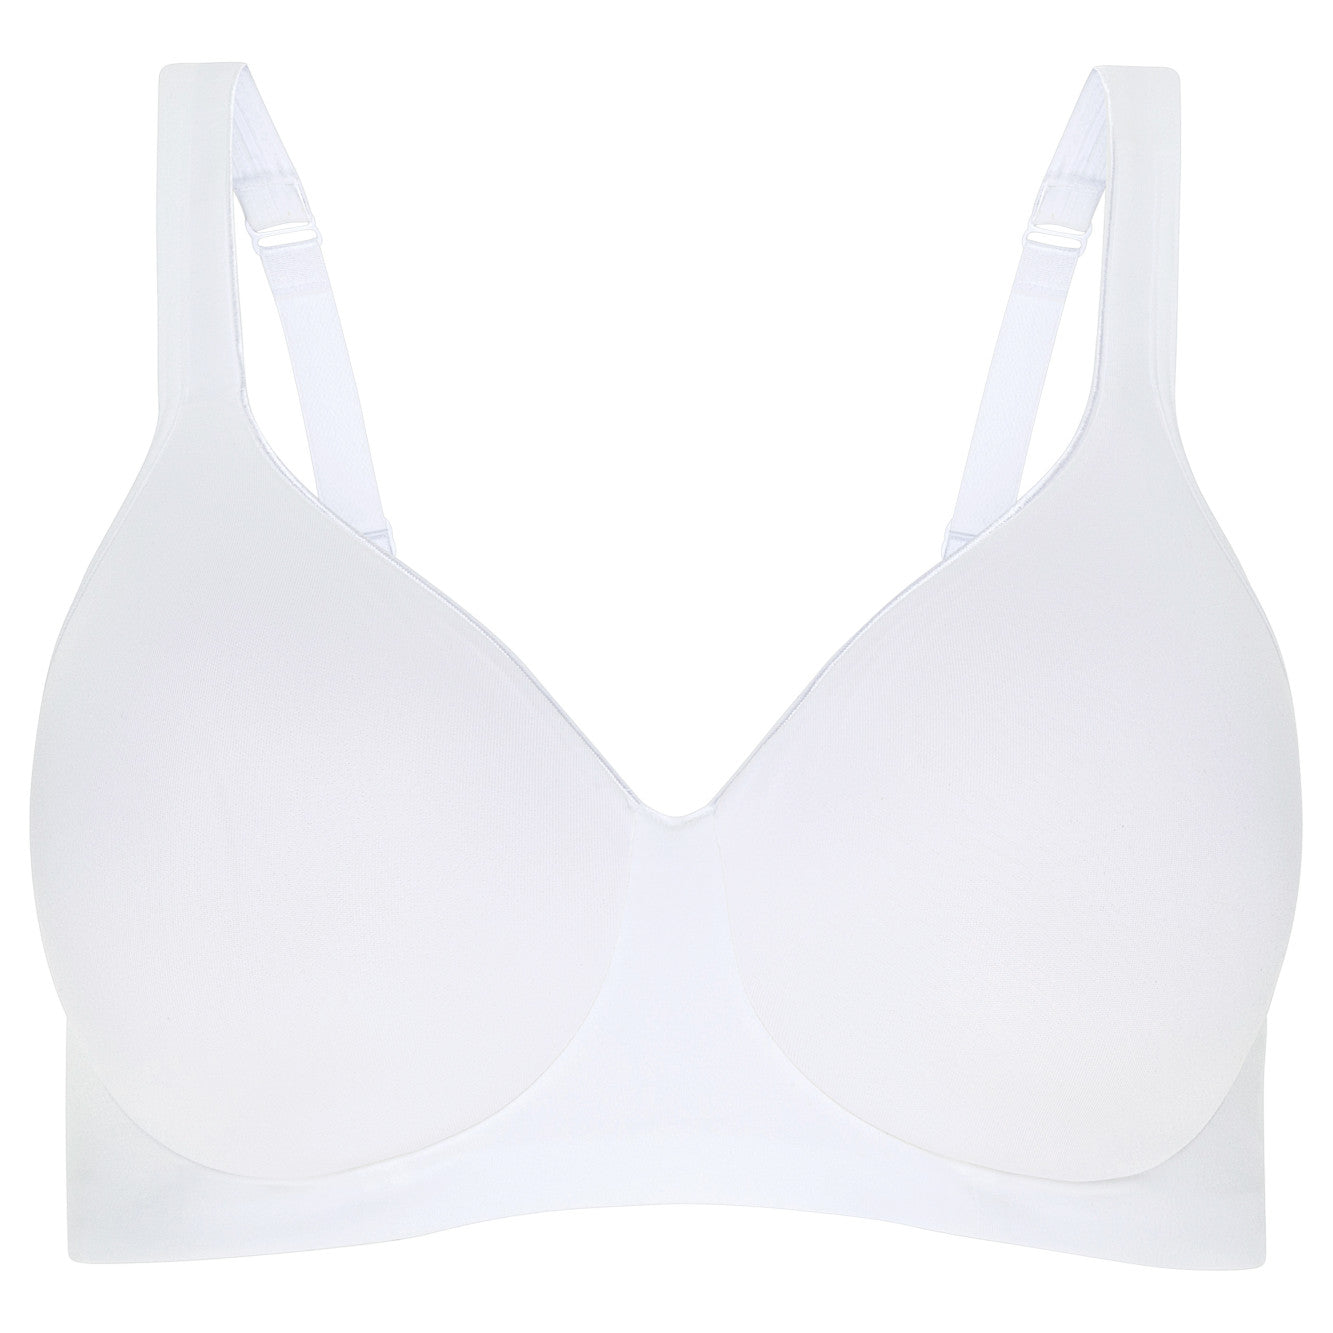 Vinatge New With Tags Jockey Smooth Contours Full Support Soft Cup Bra  Ivory 34C 